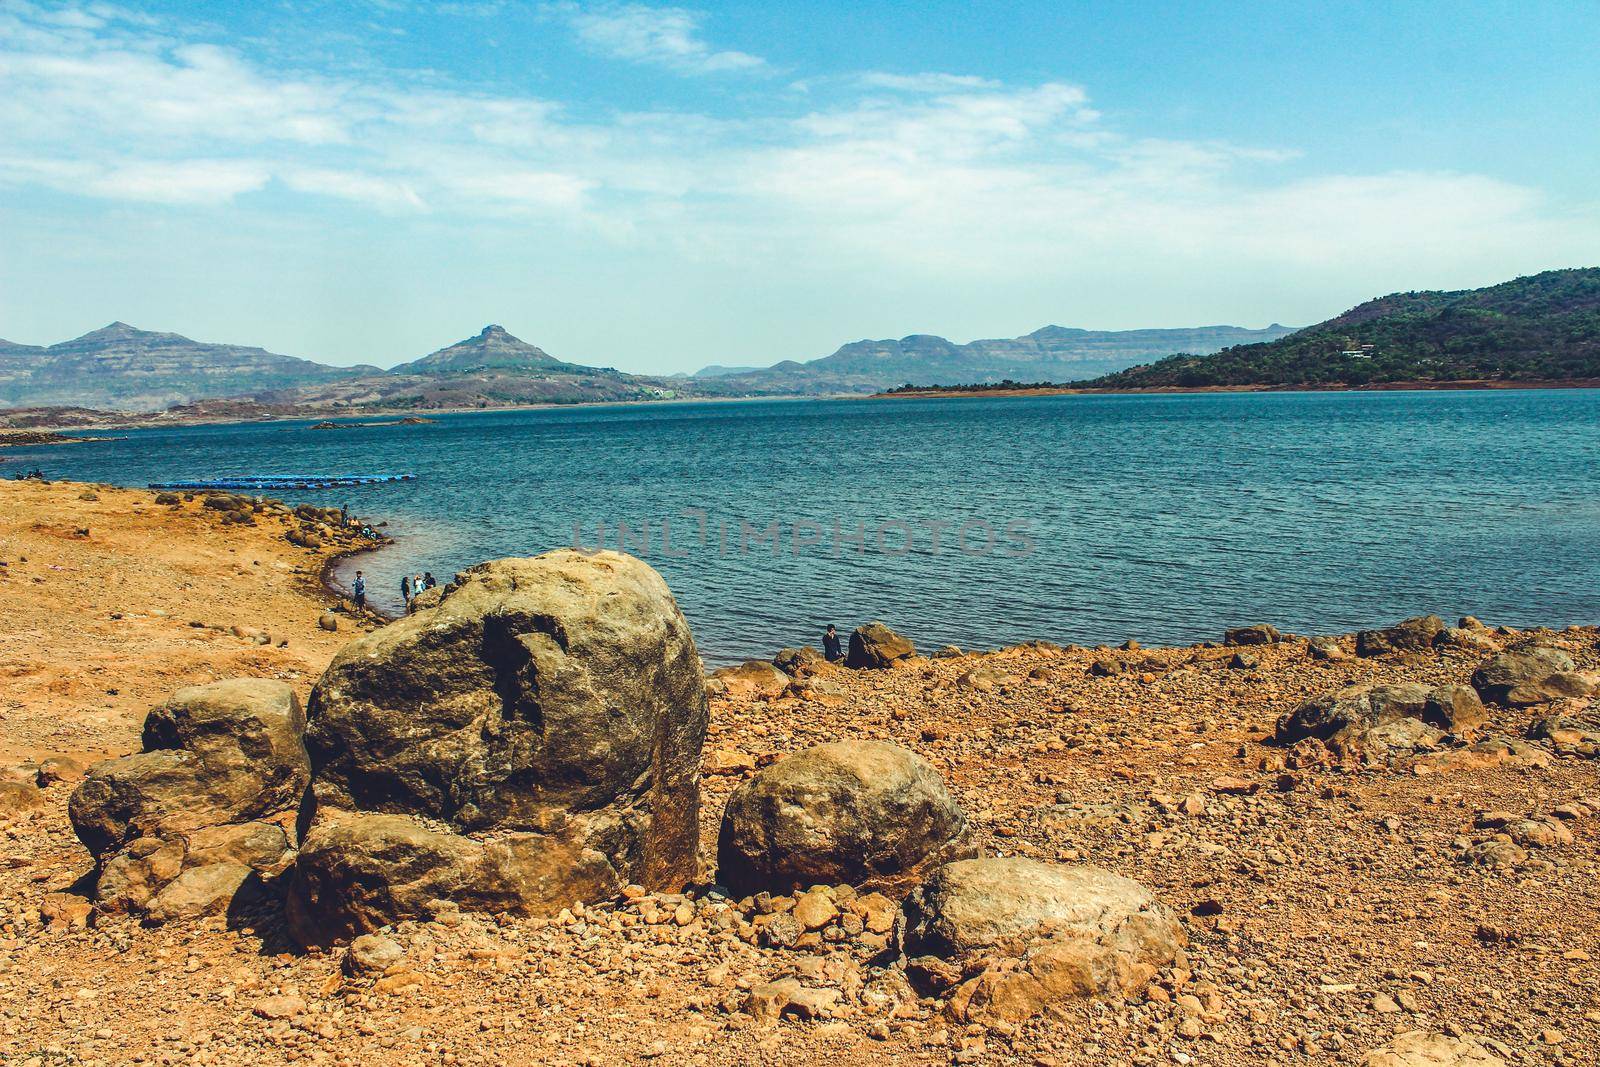 landscape of a lake from its rocky shore with mountains in the background